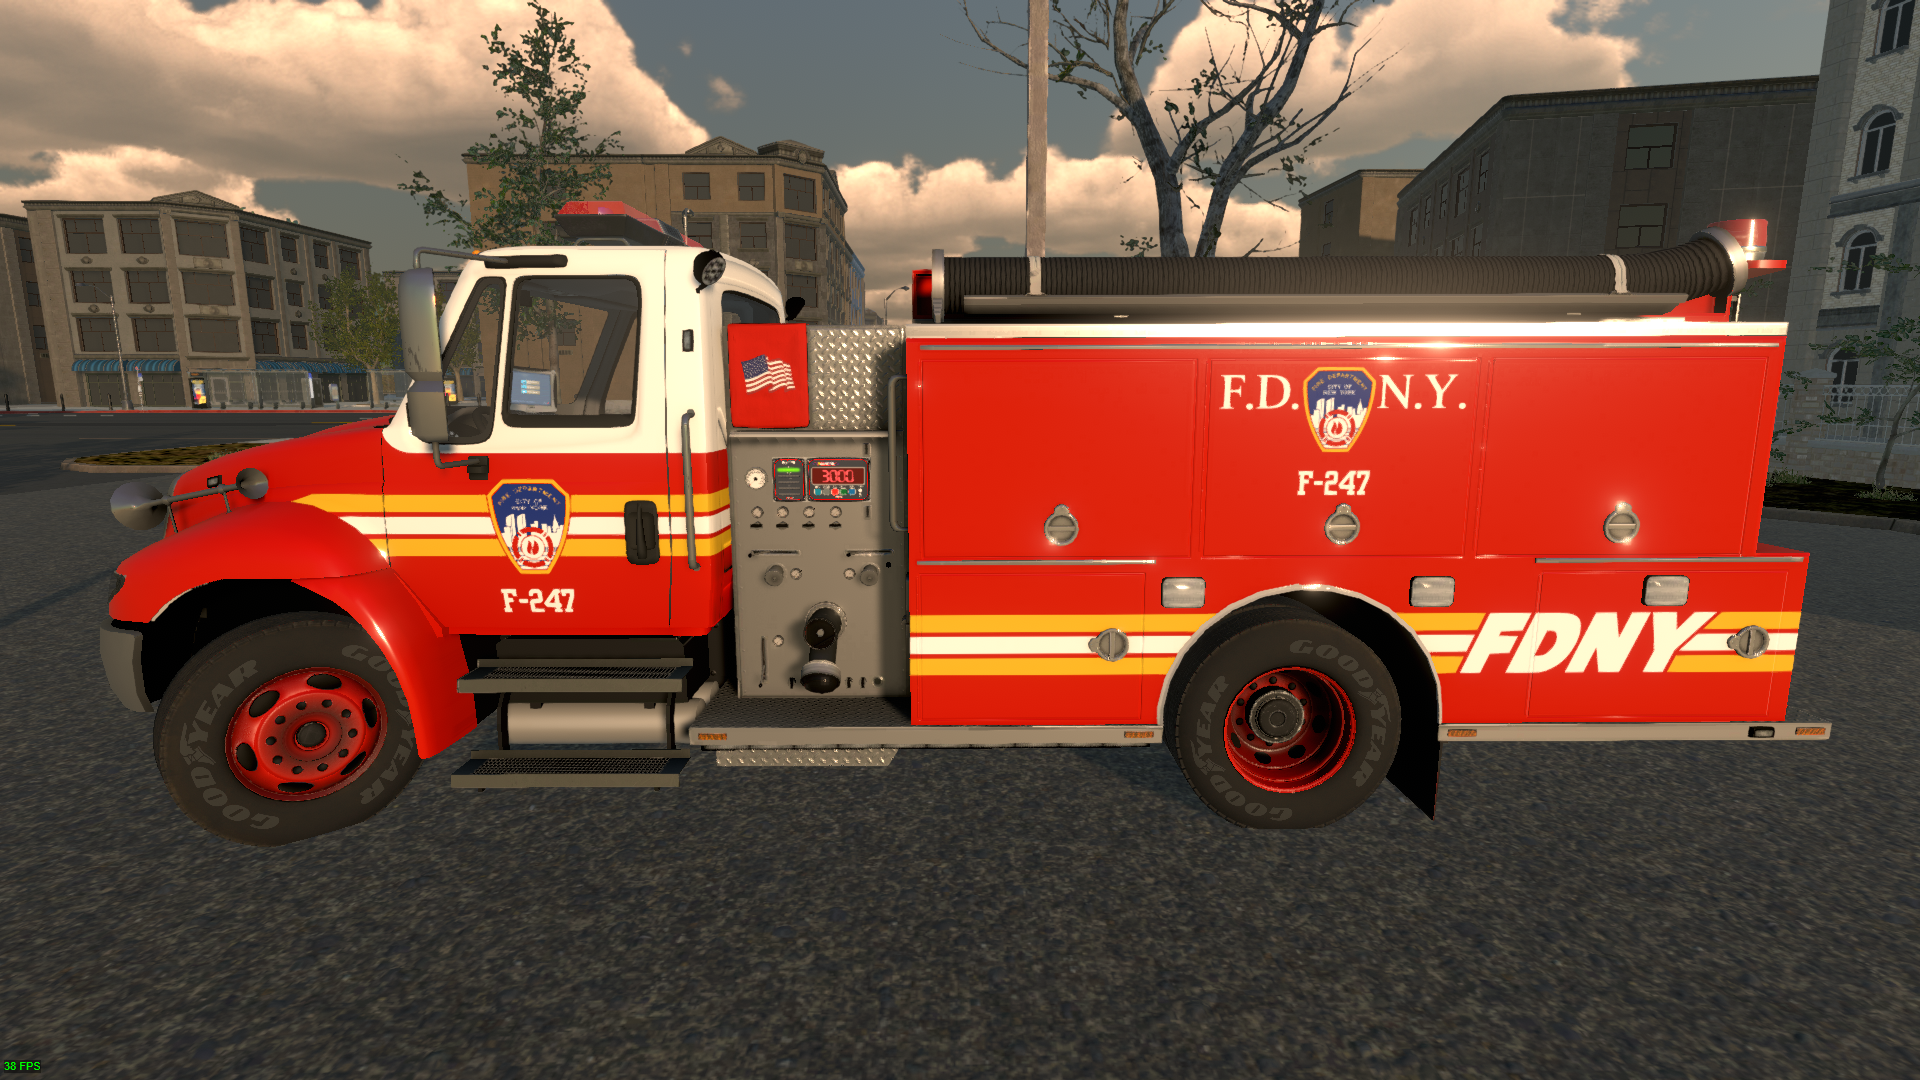 New Era Red Fire Department City of New York FDNY 77⁄8